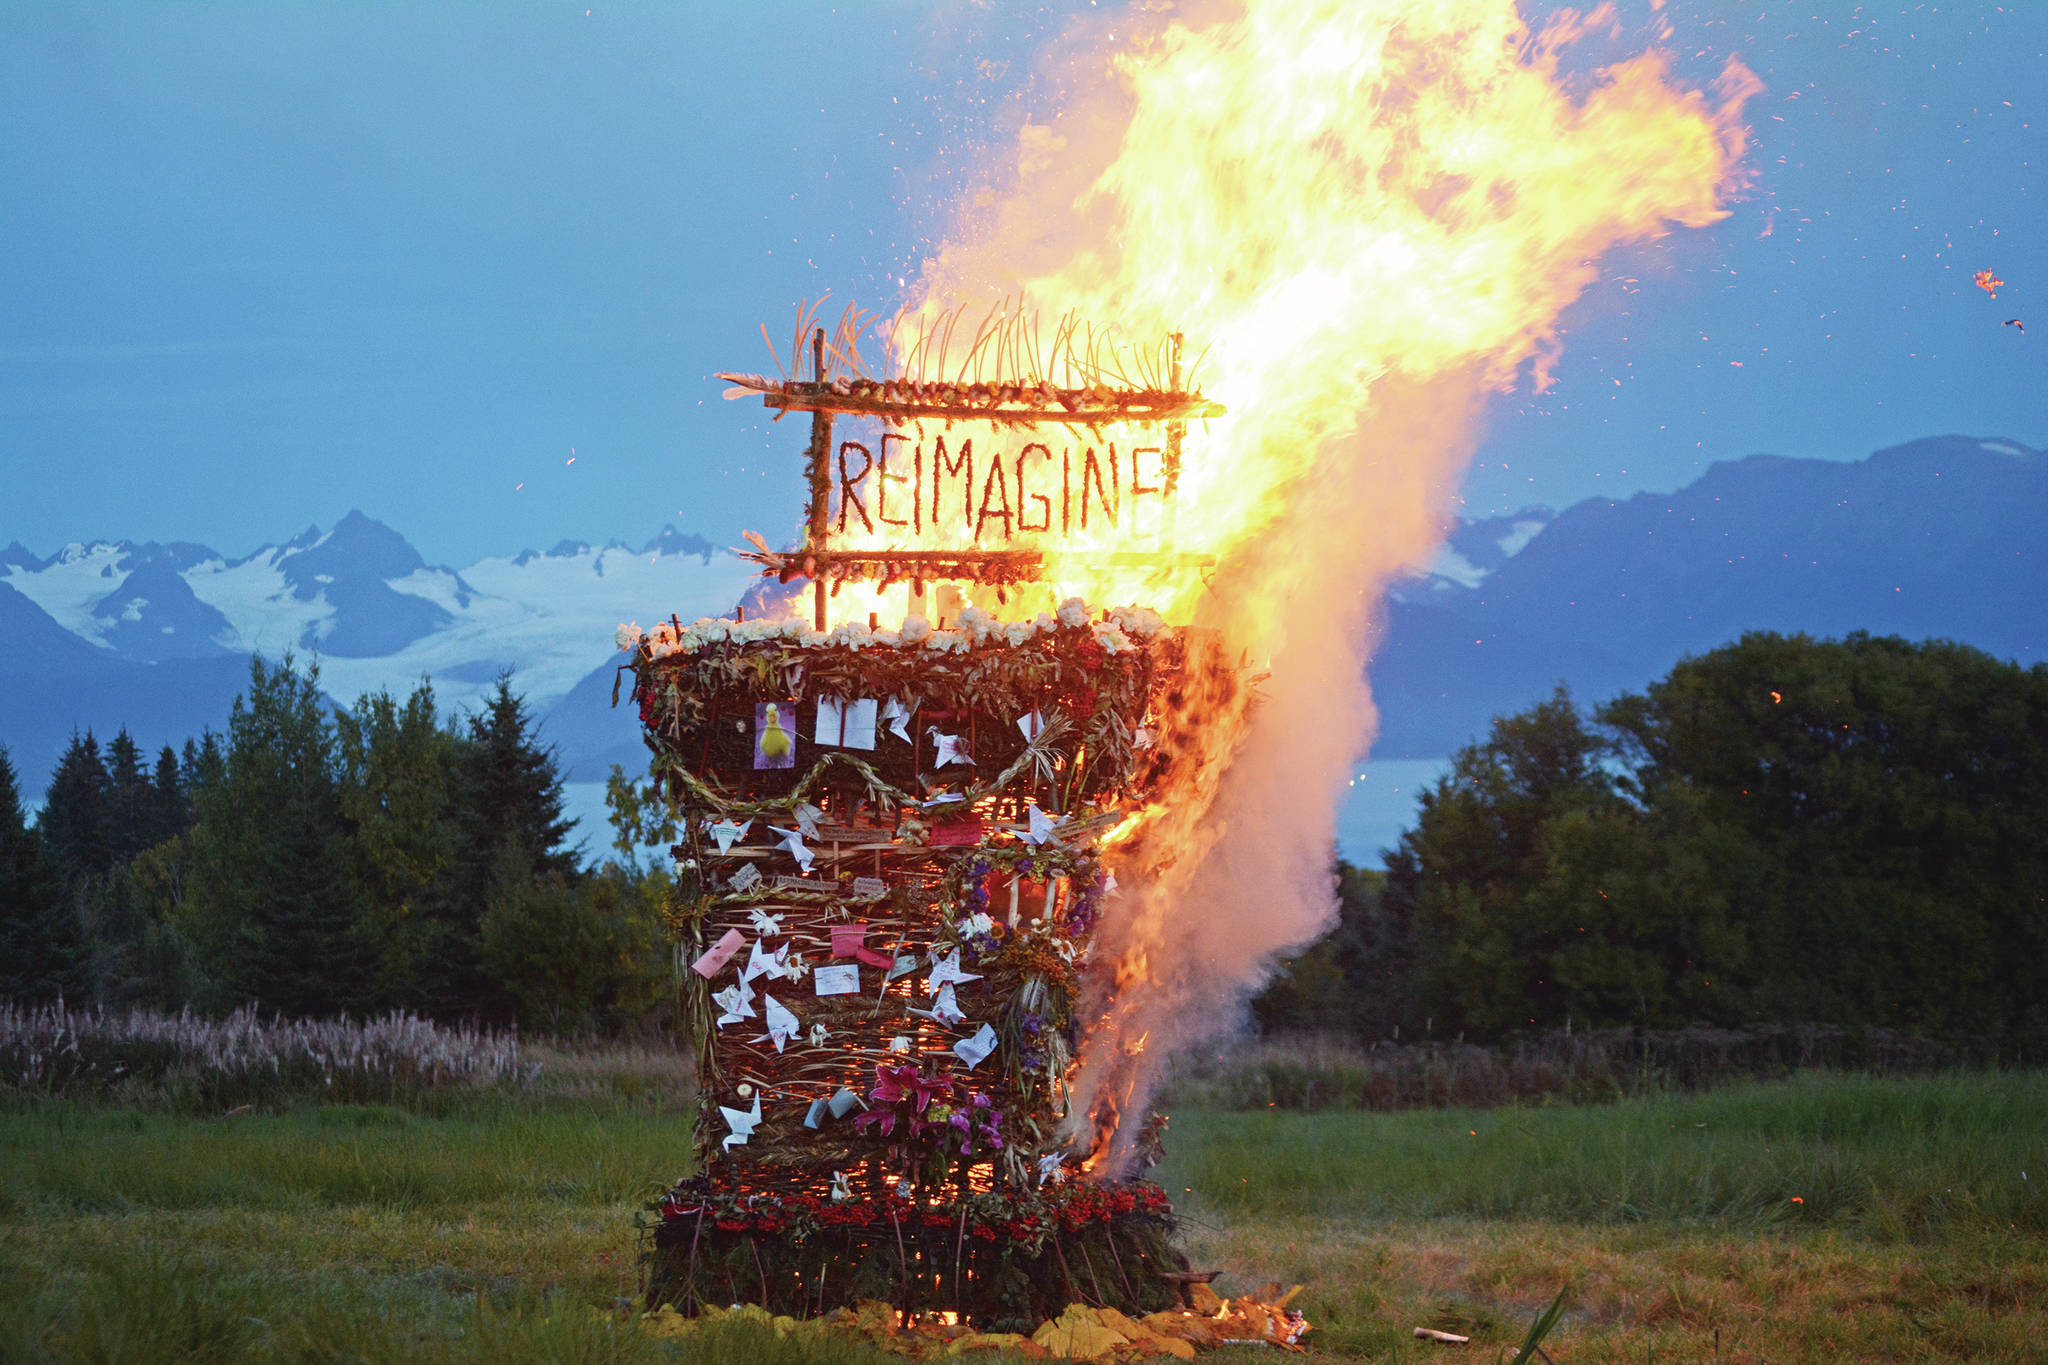 “Reimagine,” the 17th annual Burning Basket, catches fire in a field on Sunday, Sept. 13, 2020, near Homer, Alaska. Artist Mavis Muller intended to broadcast live on Facebook and YouTube the burning of the basket, but because of technical difficulties that didn’t happen. “Burning Basket teaches how to let go of expectations and accept the present moment,” Muller wrote in a text message. “Technology is fickle. The basket, however, did exactly what it promised to do. It helod our collective burderns, our memorials, our joys, sadness, fear, and dispersed all of our good intentions in a plume of smoke, sparks and flames.” (Photo by Michael Armstrong/Homer News)